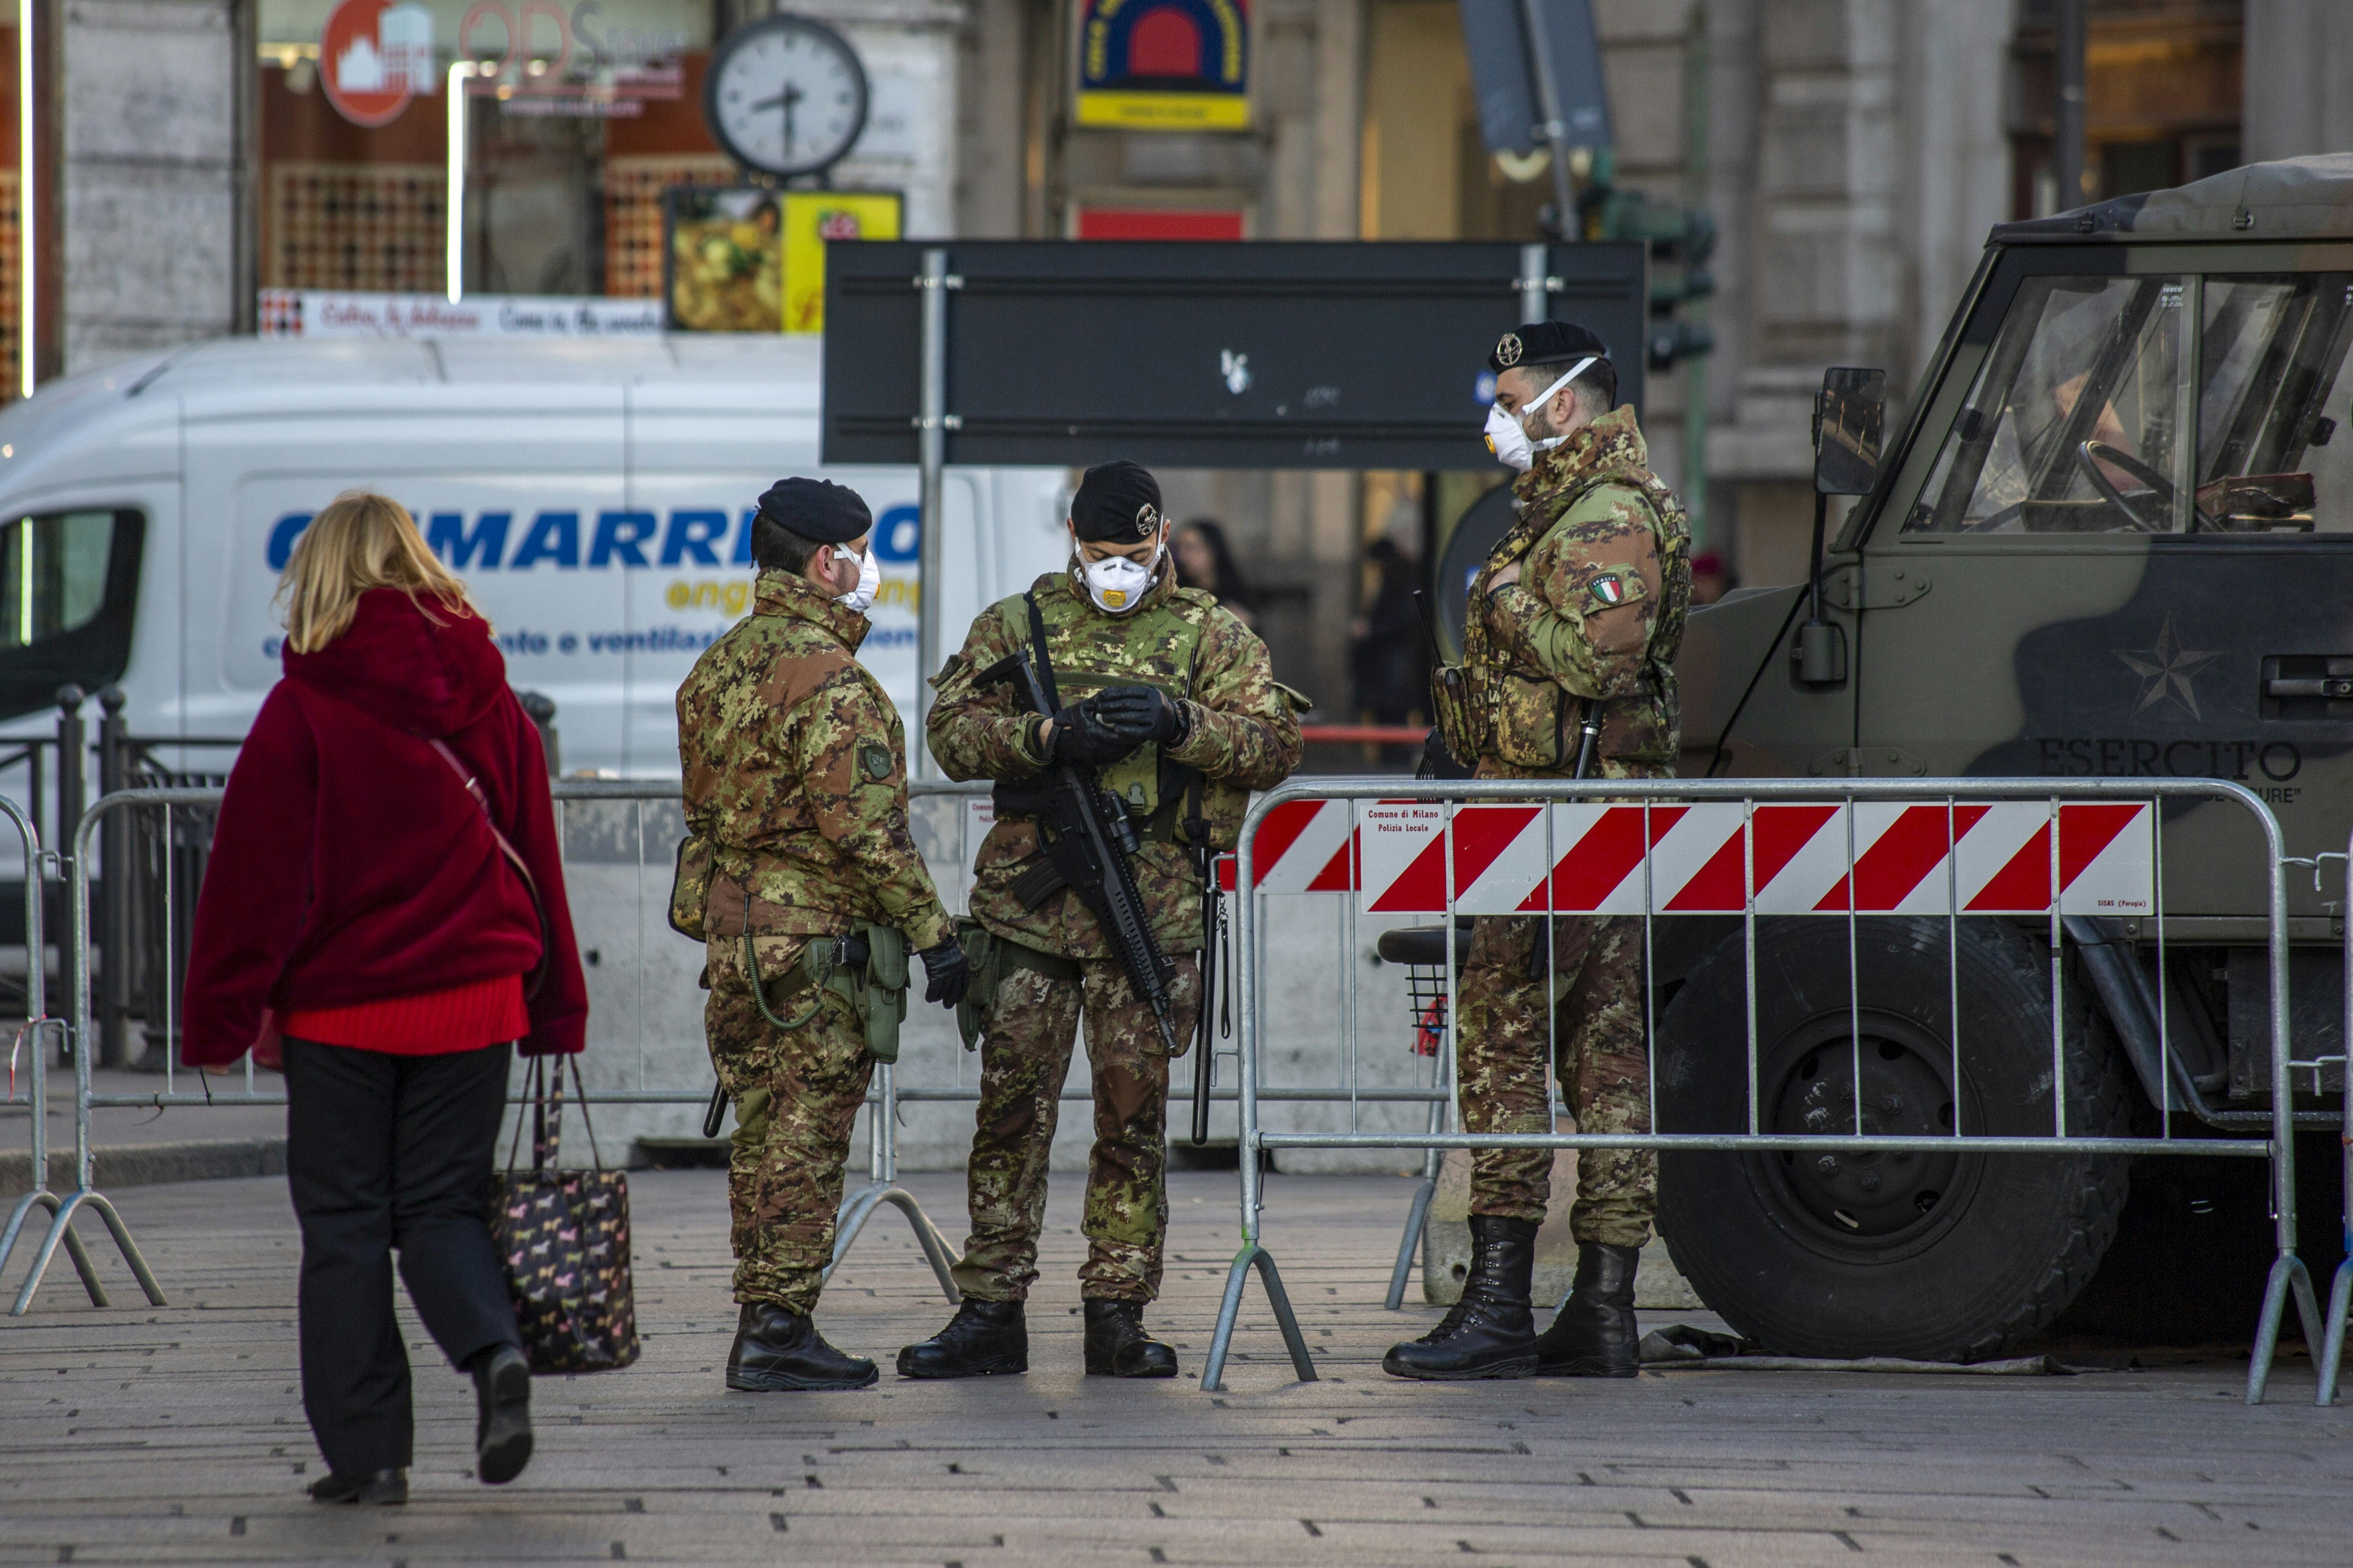 Italian Army soldiers wear protective face masks as they stand on security near Duomo cathedral